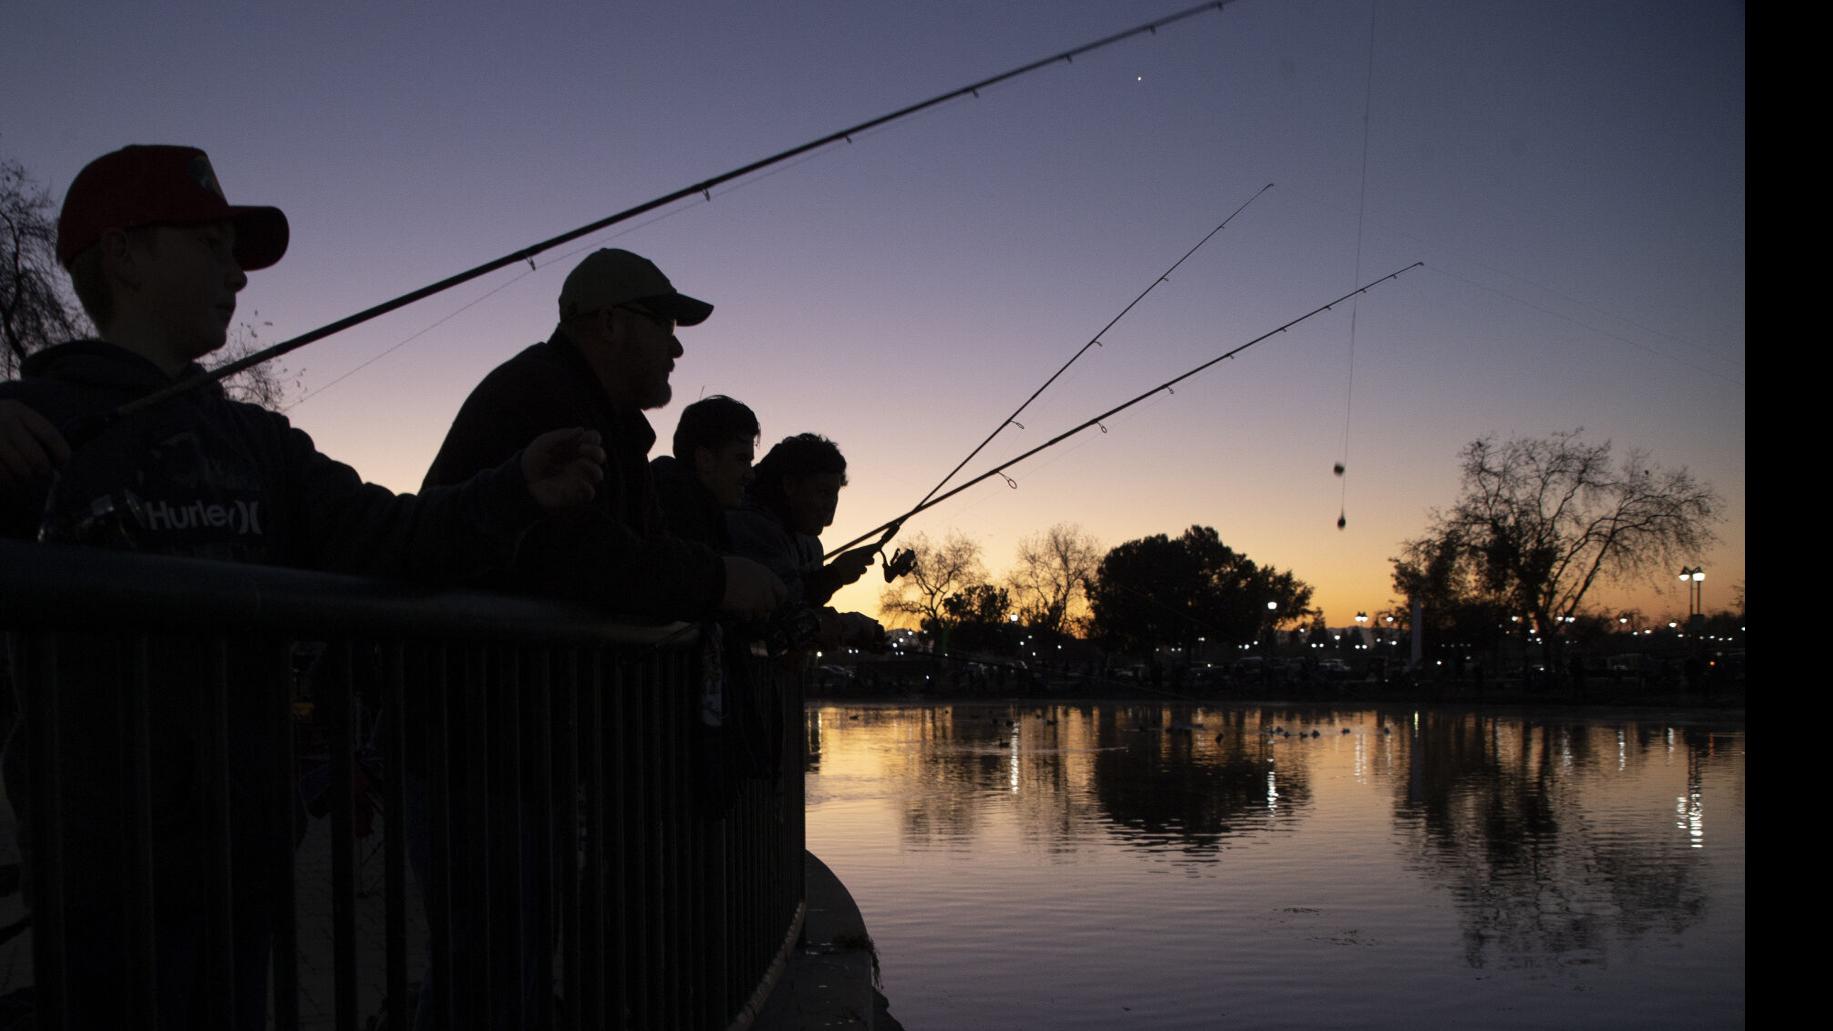 Reeling it in: Firefighters Fishing Derby brings crowd to The Park at River  Walk, News